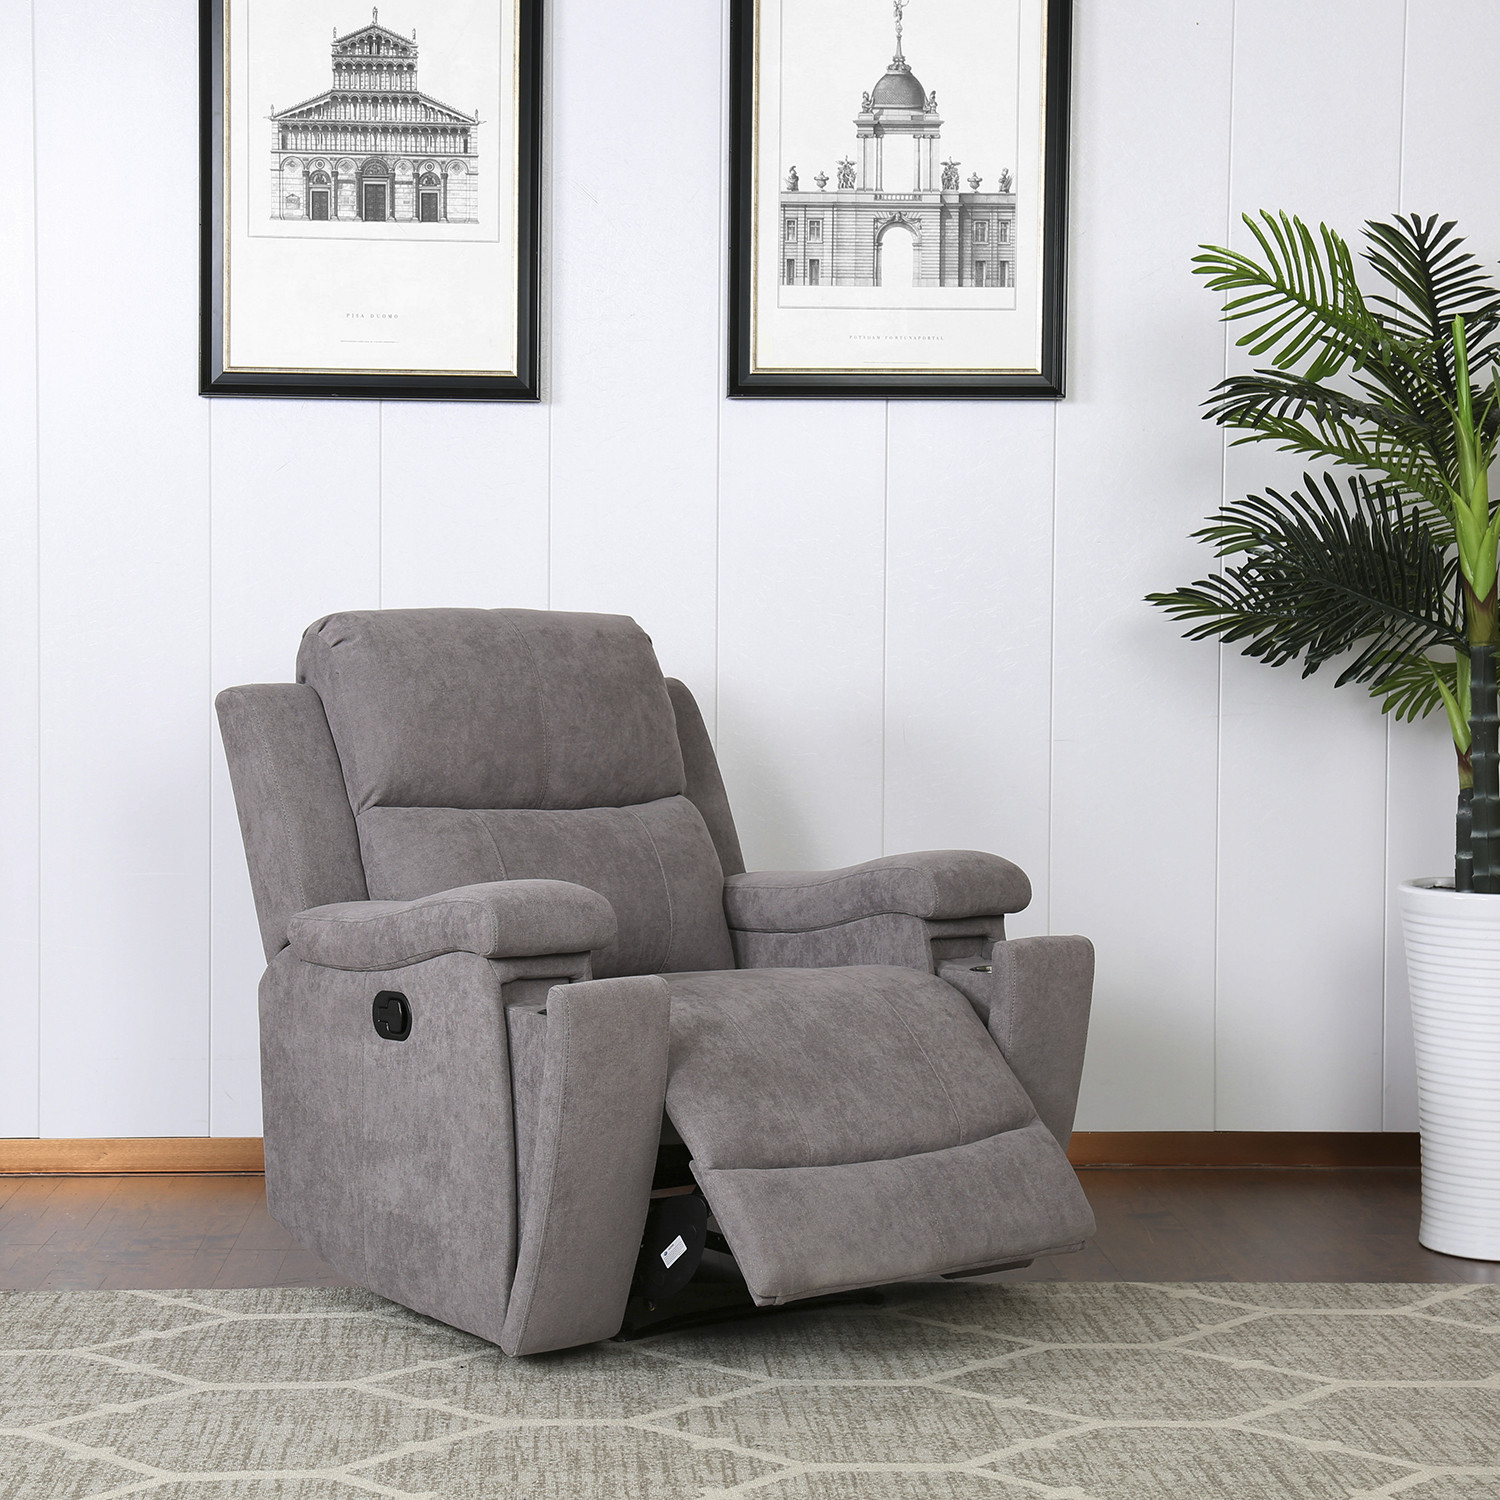 Ledbury Grey Fabric Manual Recliner Chair with Footrest Image 4